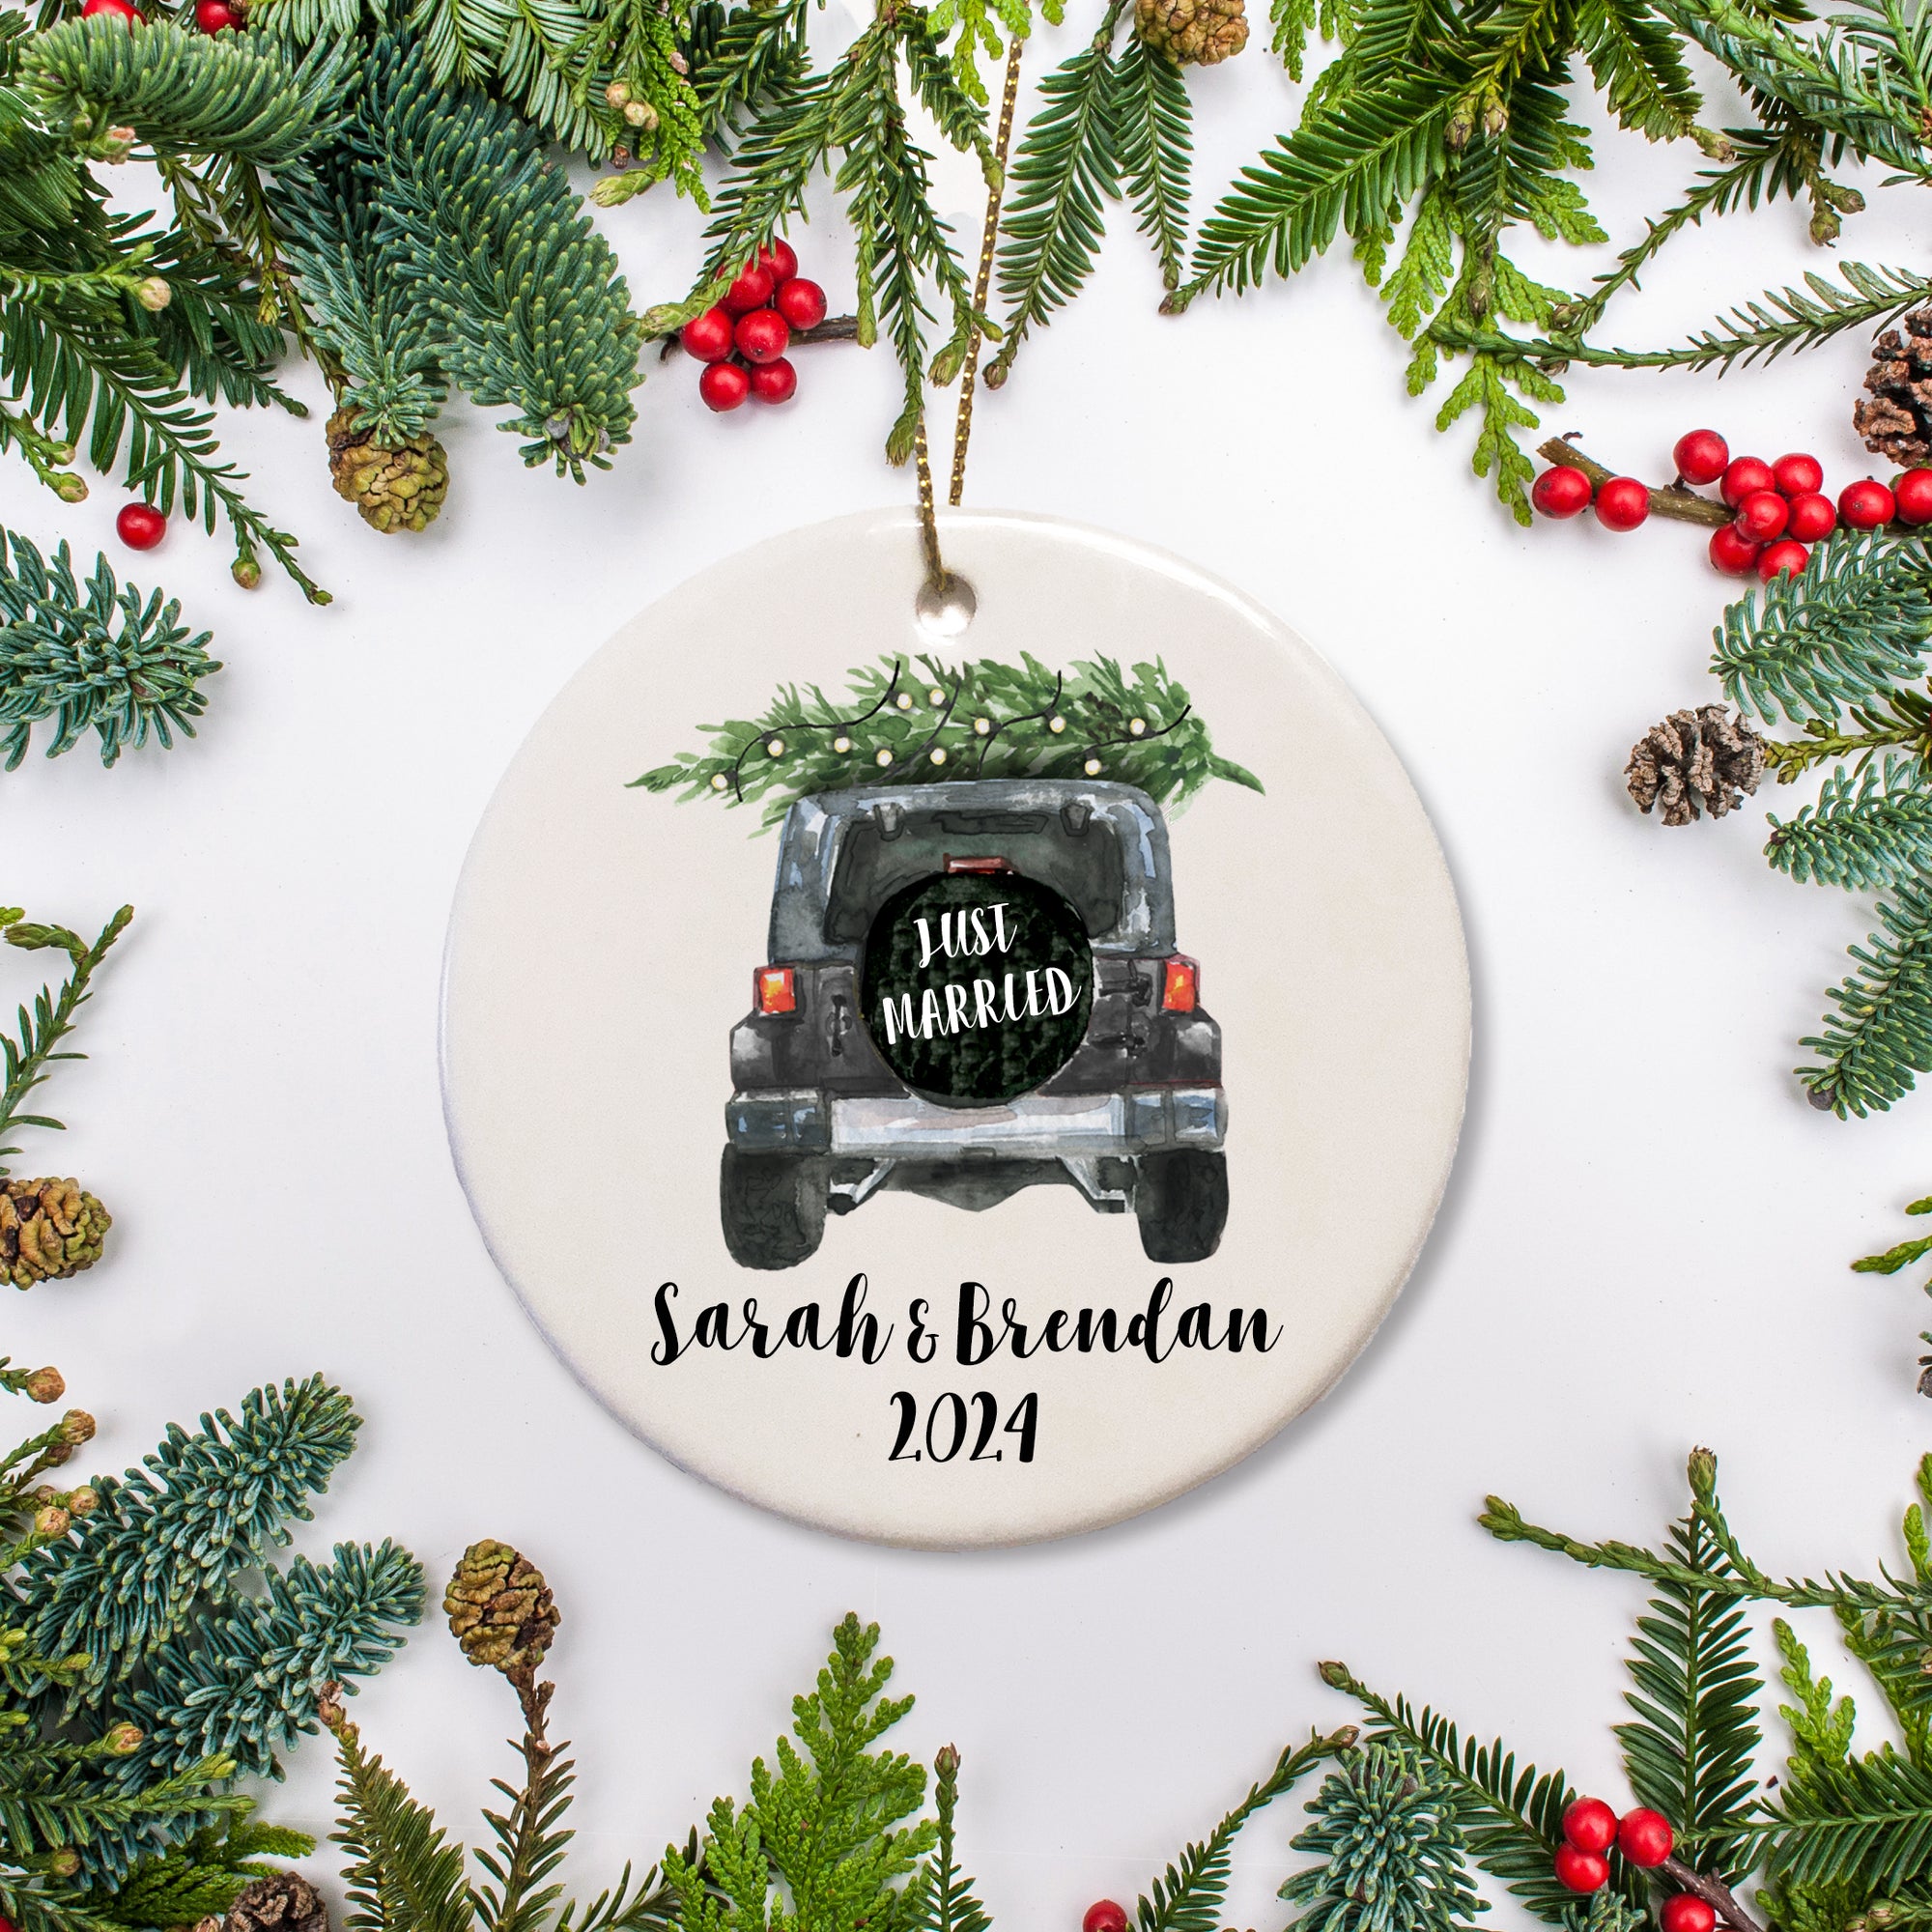 A keepsake ornament of a jeep which says “Just Married” with a Christmas tree which is personalized and includes the year. The jeep is black.